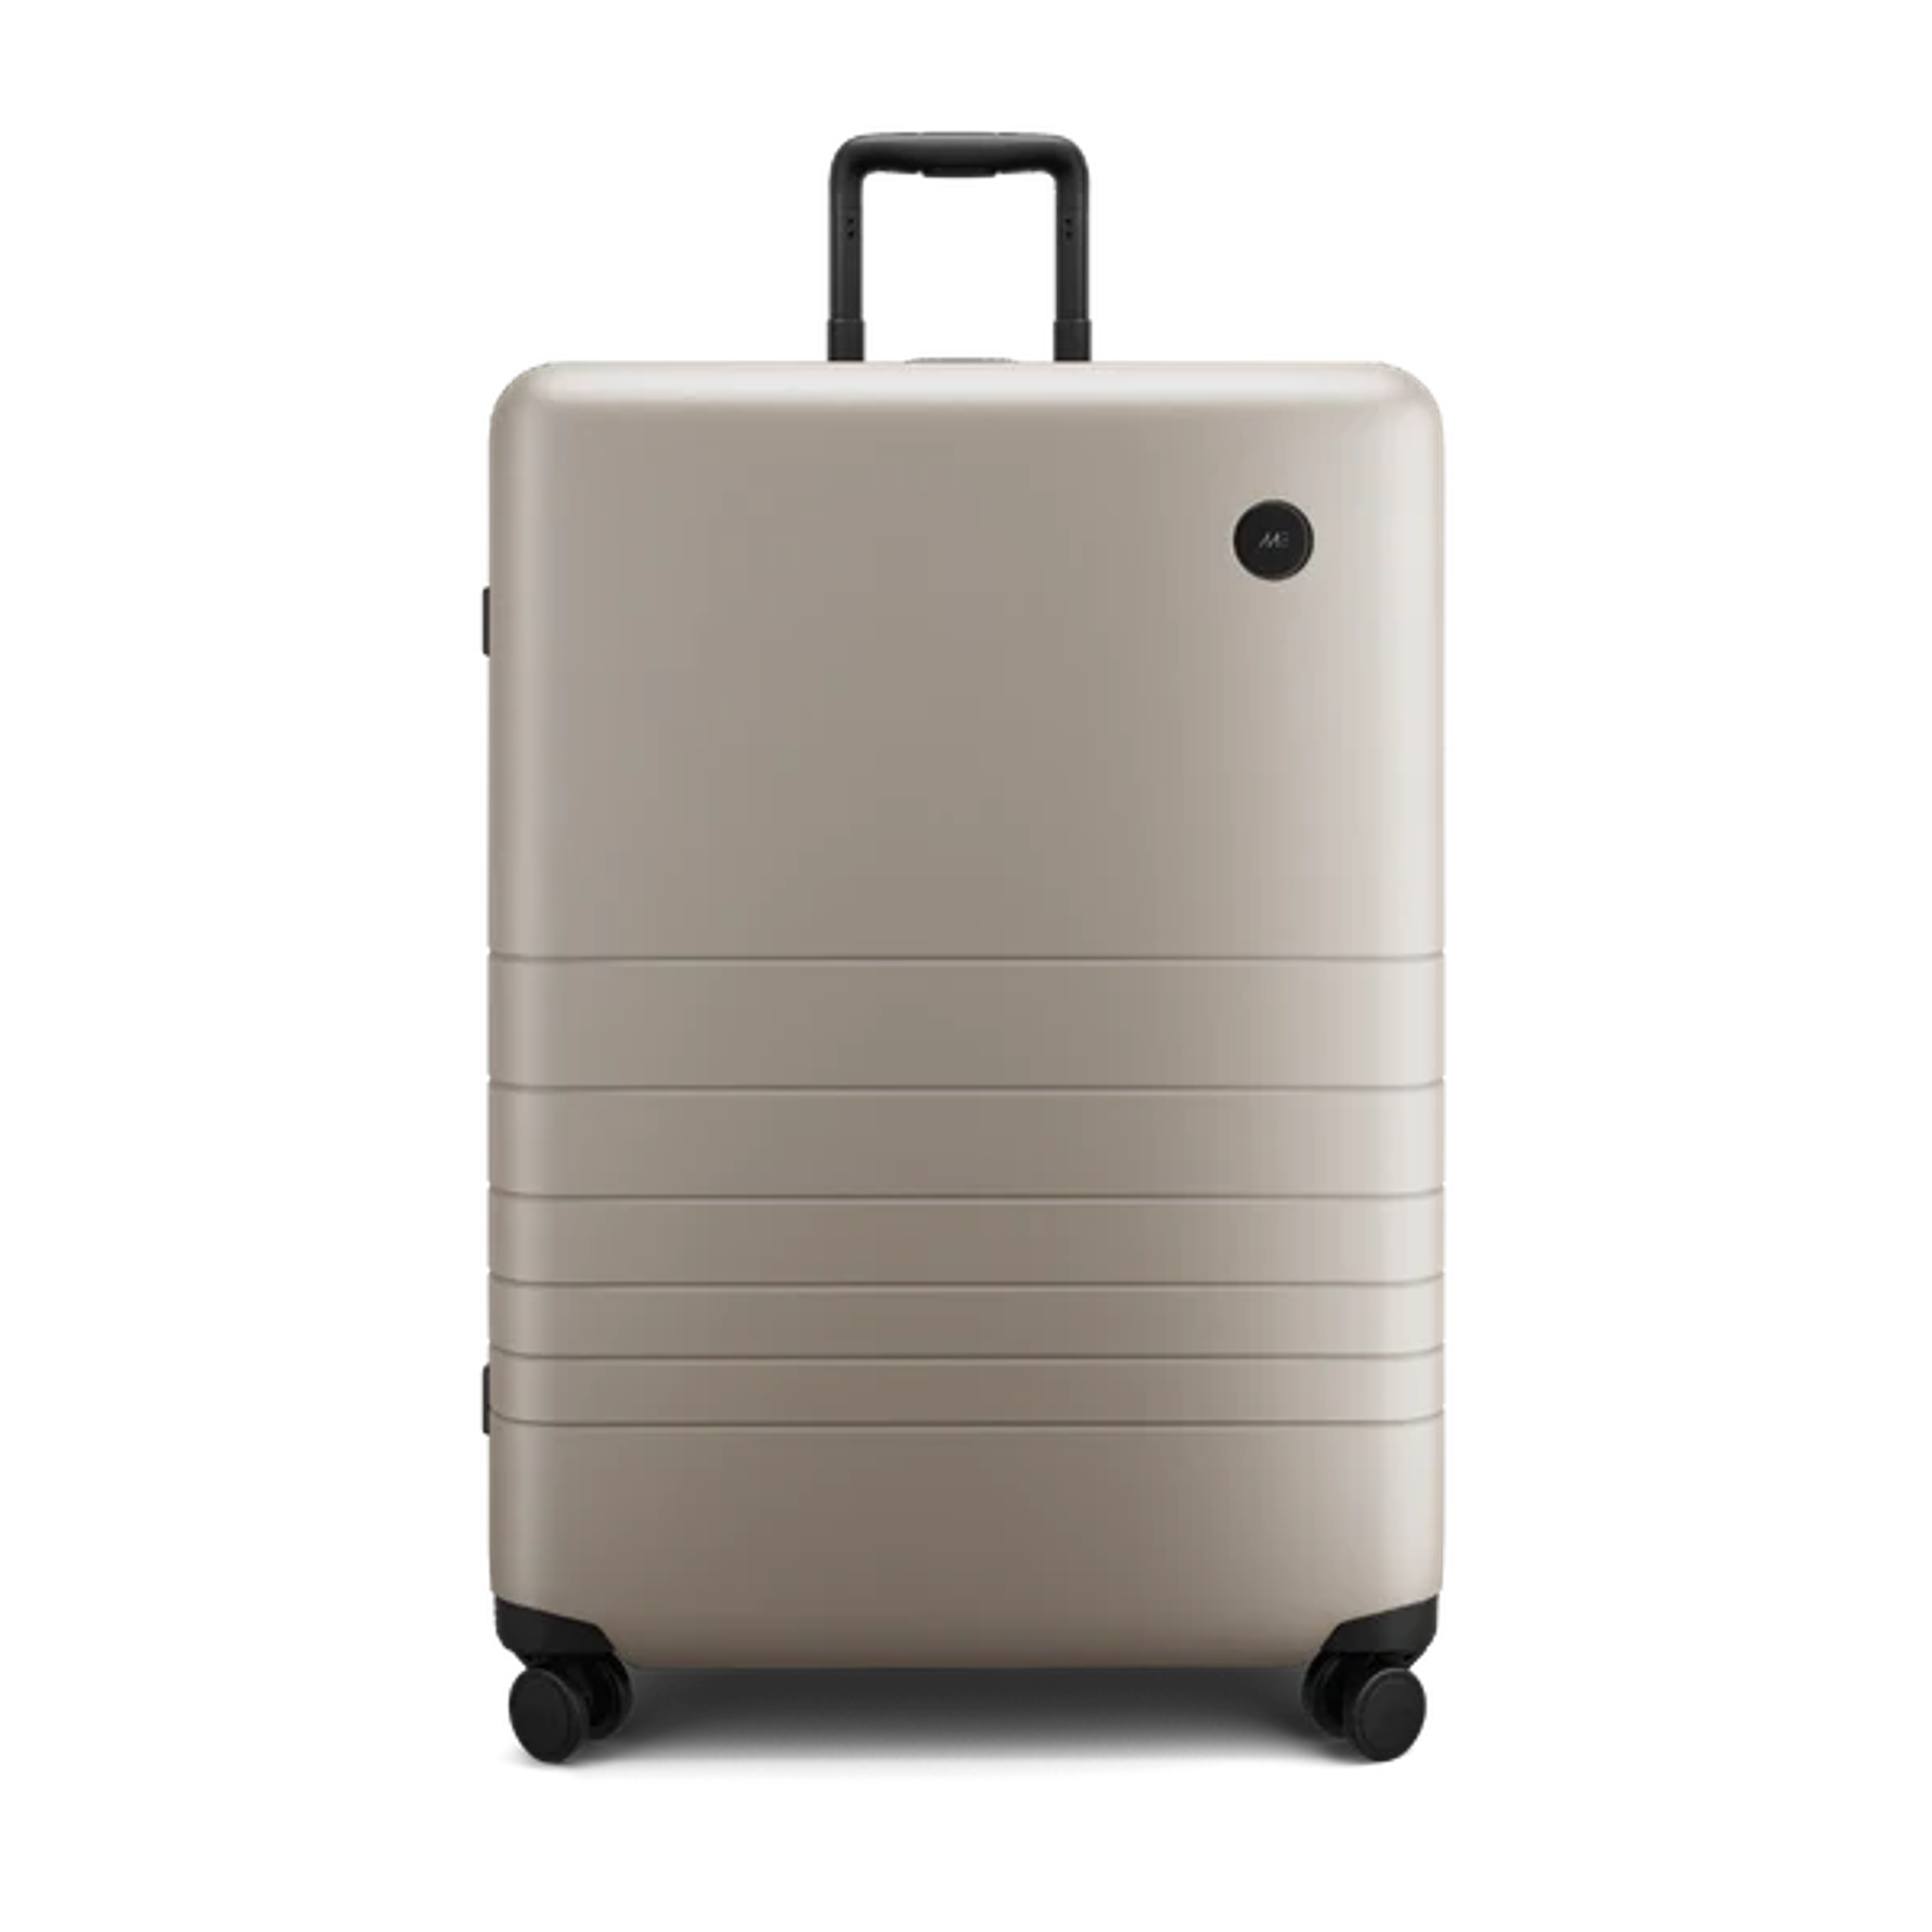 Best Check-In Suitcases | Monos Travel Luggage & Accessories